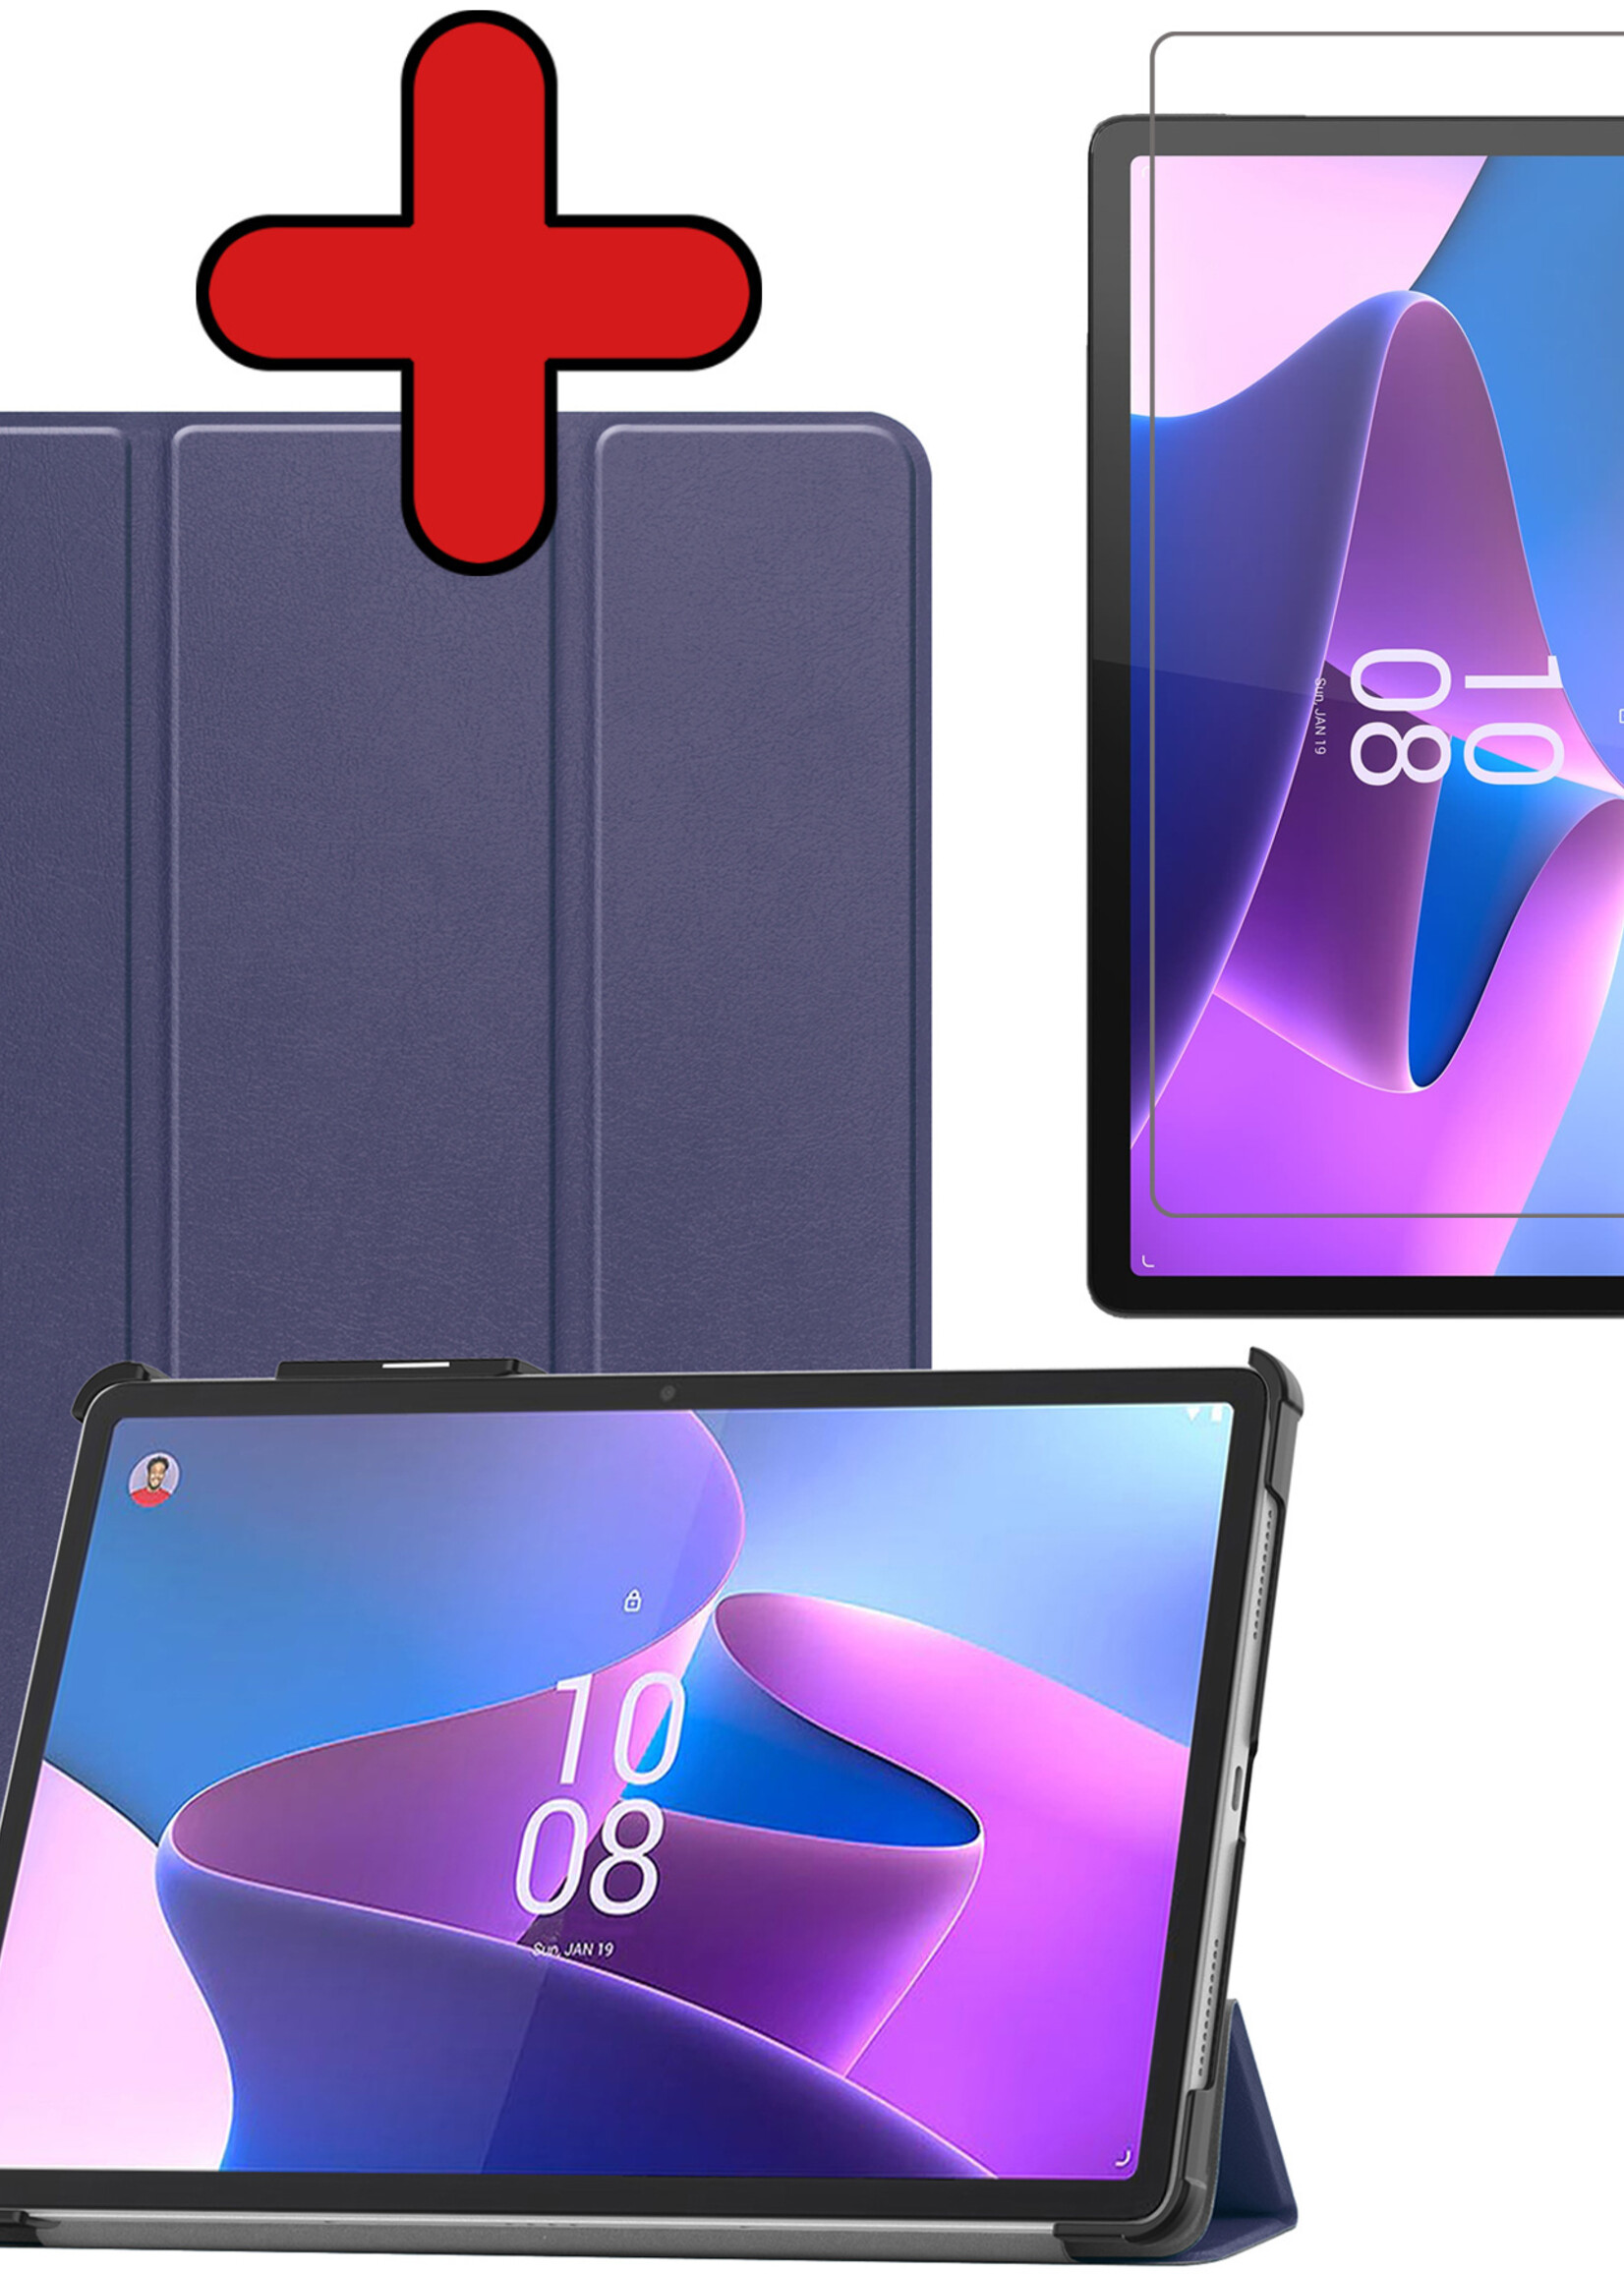 BTH Hoes Geschikt voor Lenovo Tab P11 Pro Hoes Book Case Hoesje Trifold Cover Met Uitsparing Geschikt voor Lenovo Pen - Hoesje Geschikt voor Lenovo Tab P11 Pro Hoesje Bookcase - Donkerblauw